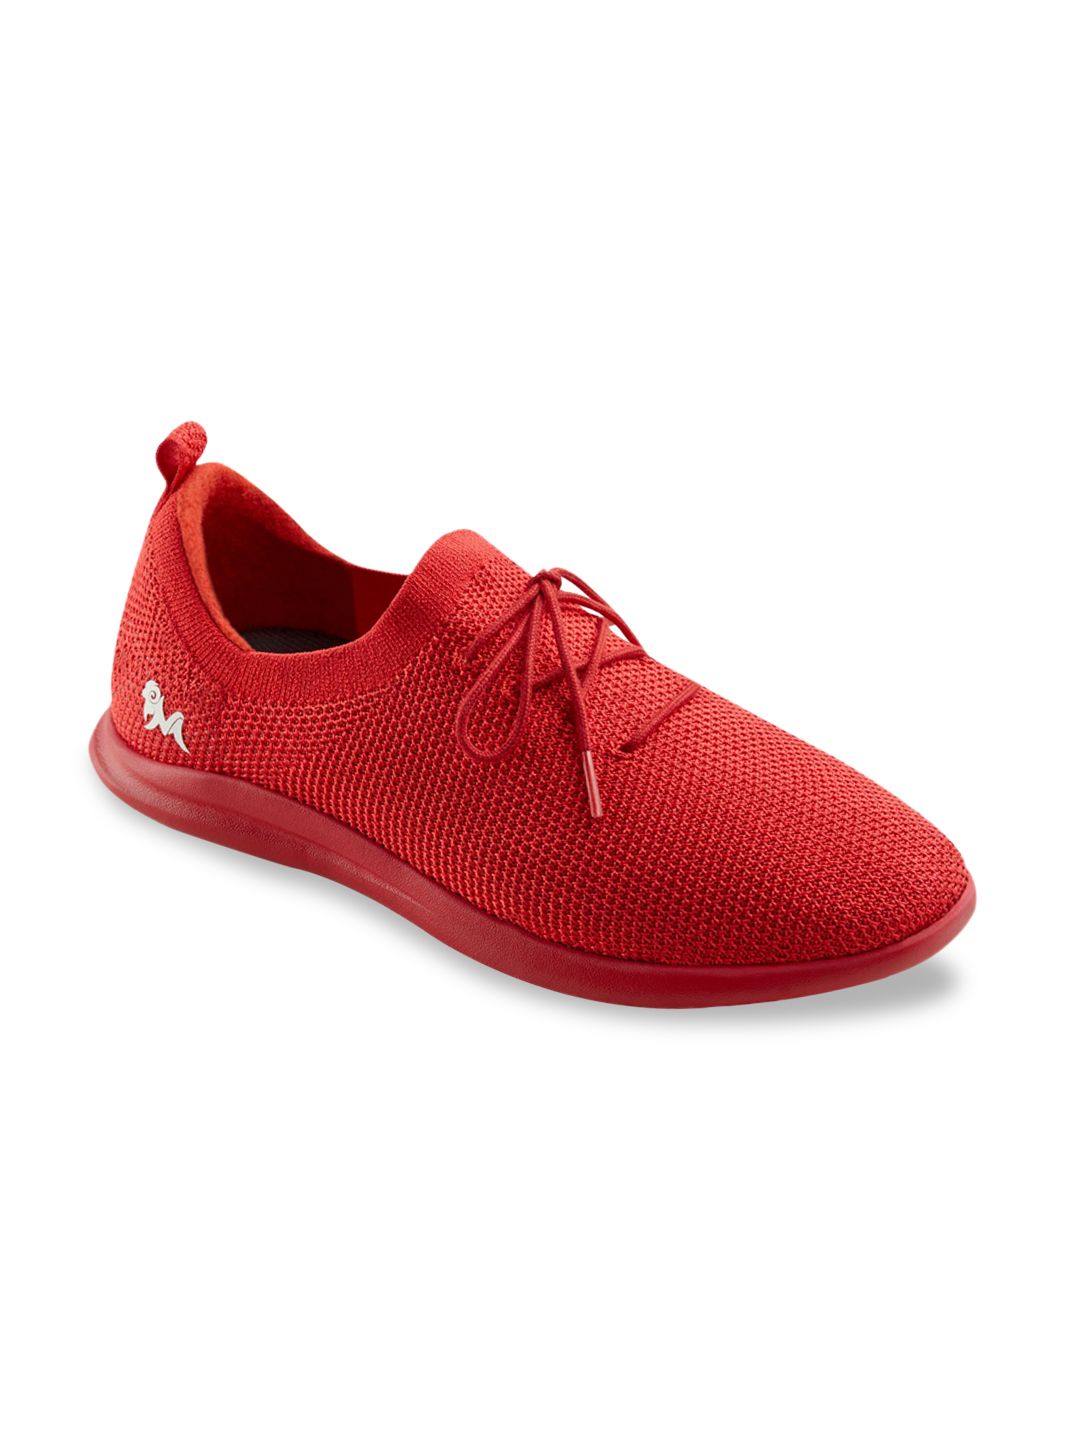 NEEMANS Unisex Red Re-Live Knit Sneakers Price in India